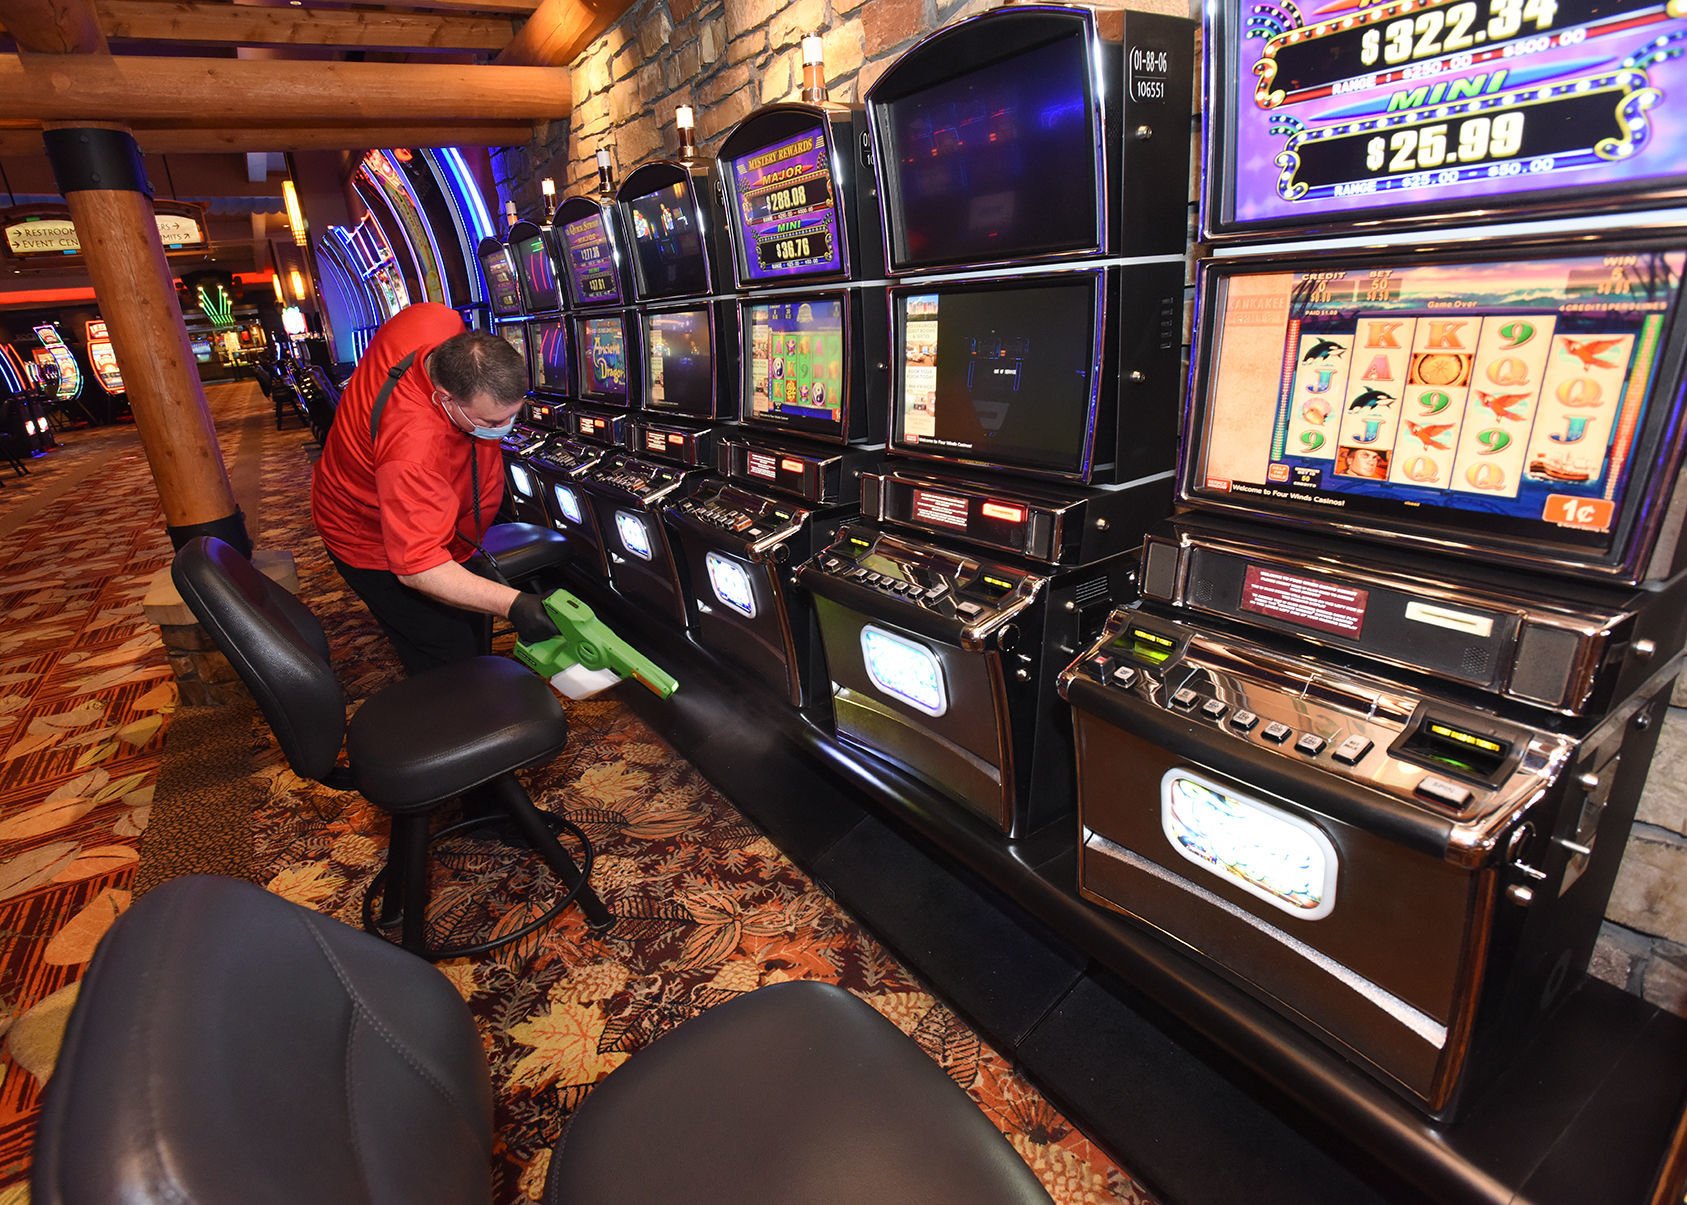 four winds casinos events in indiana